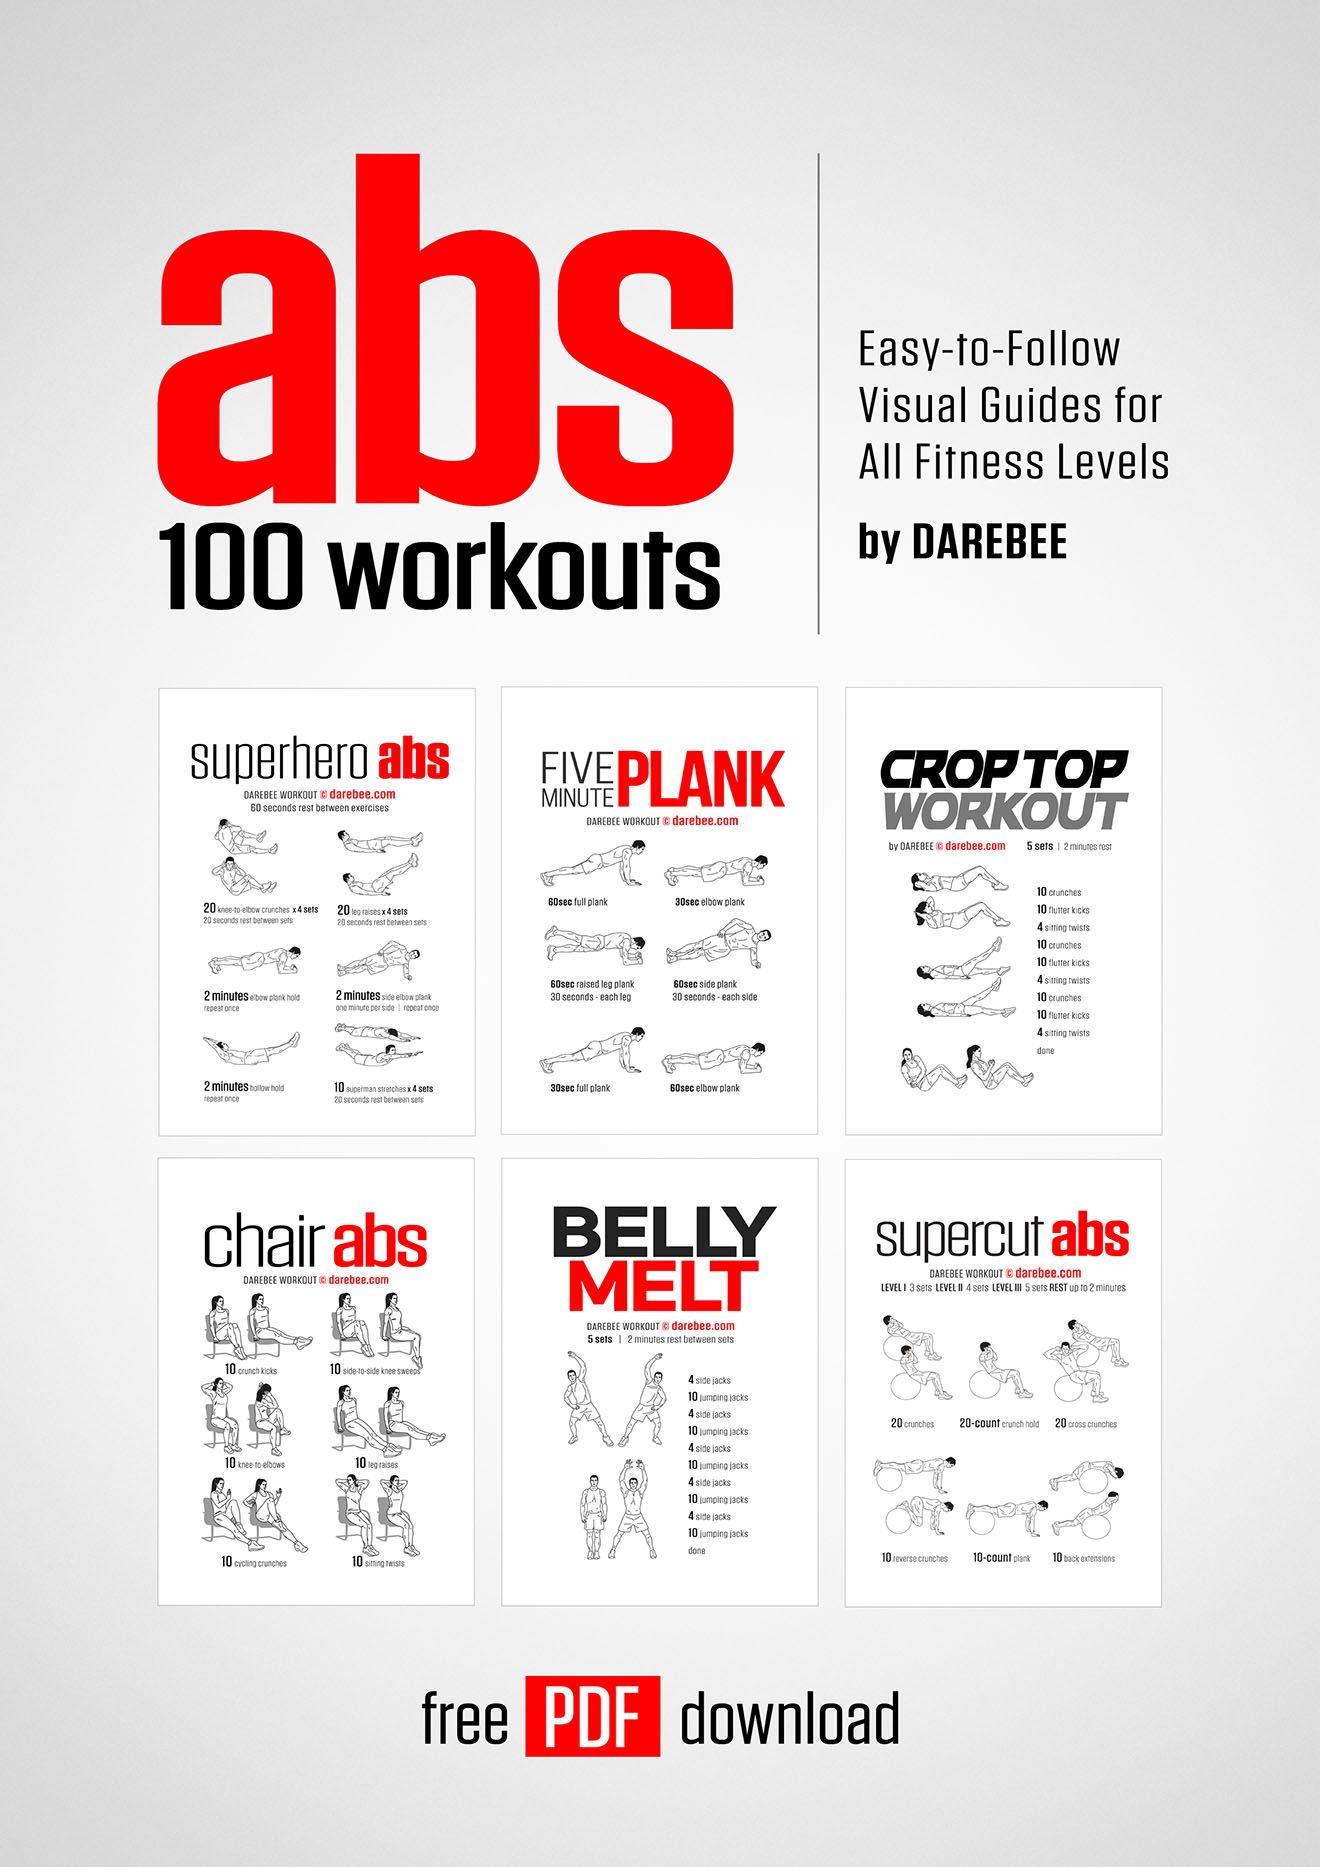 20 Minute Abs and Core Workout - Dumbbells + Bodyweight